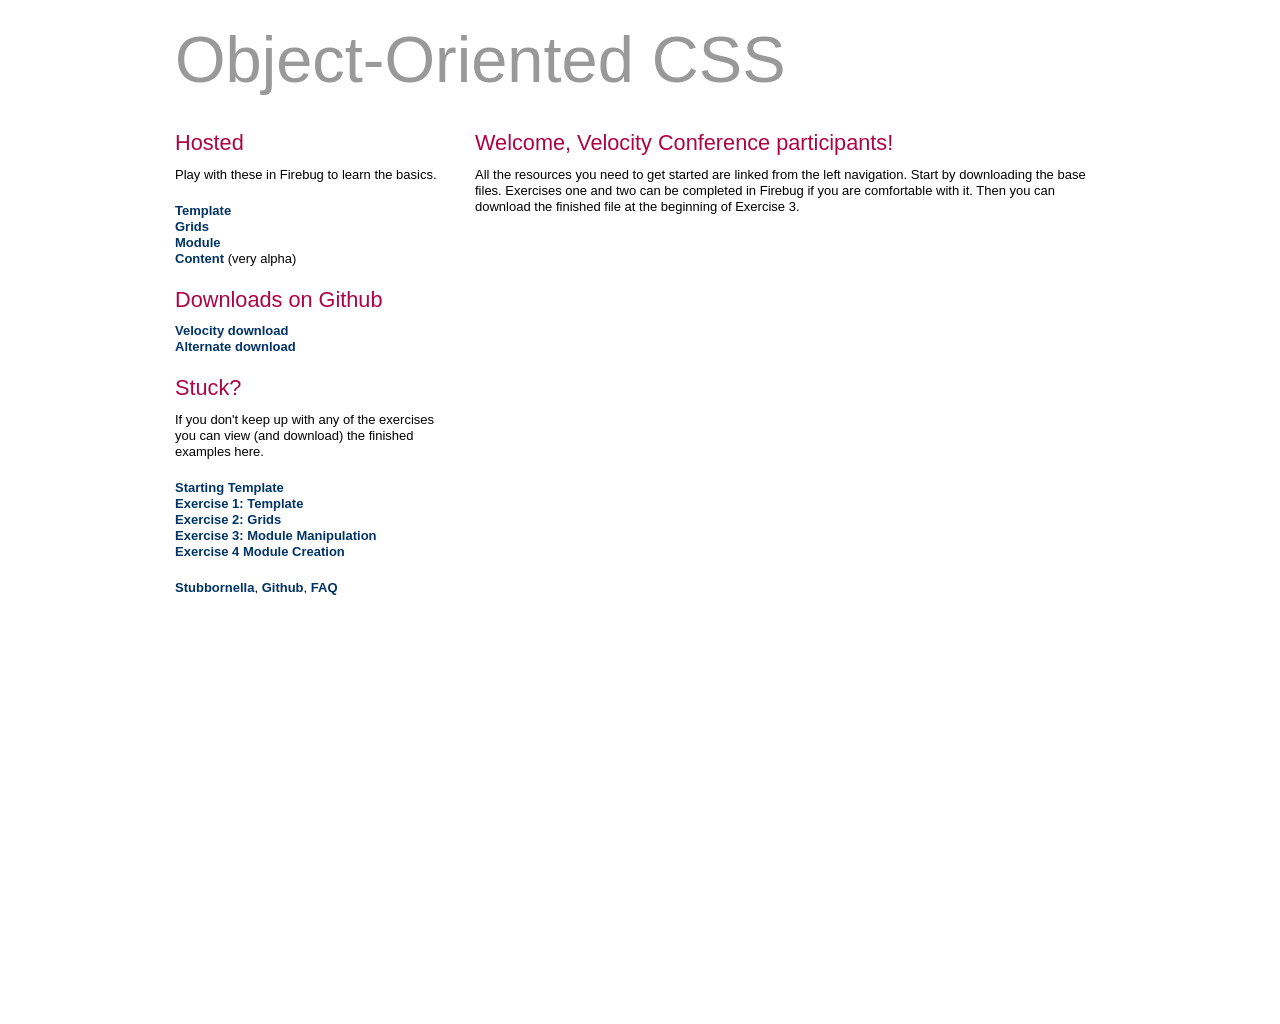 oocss.org